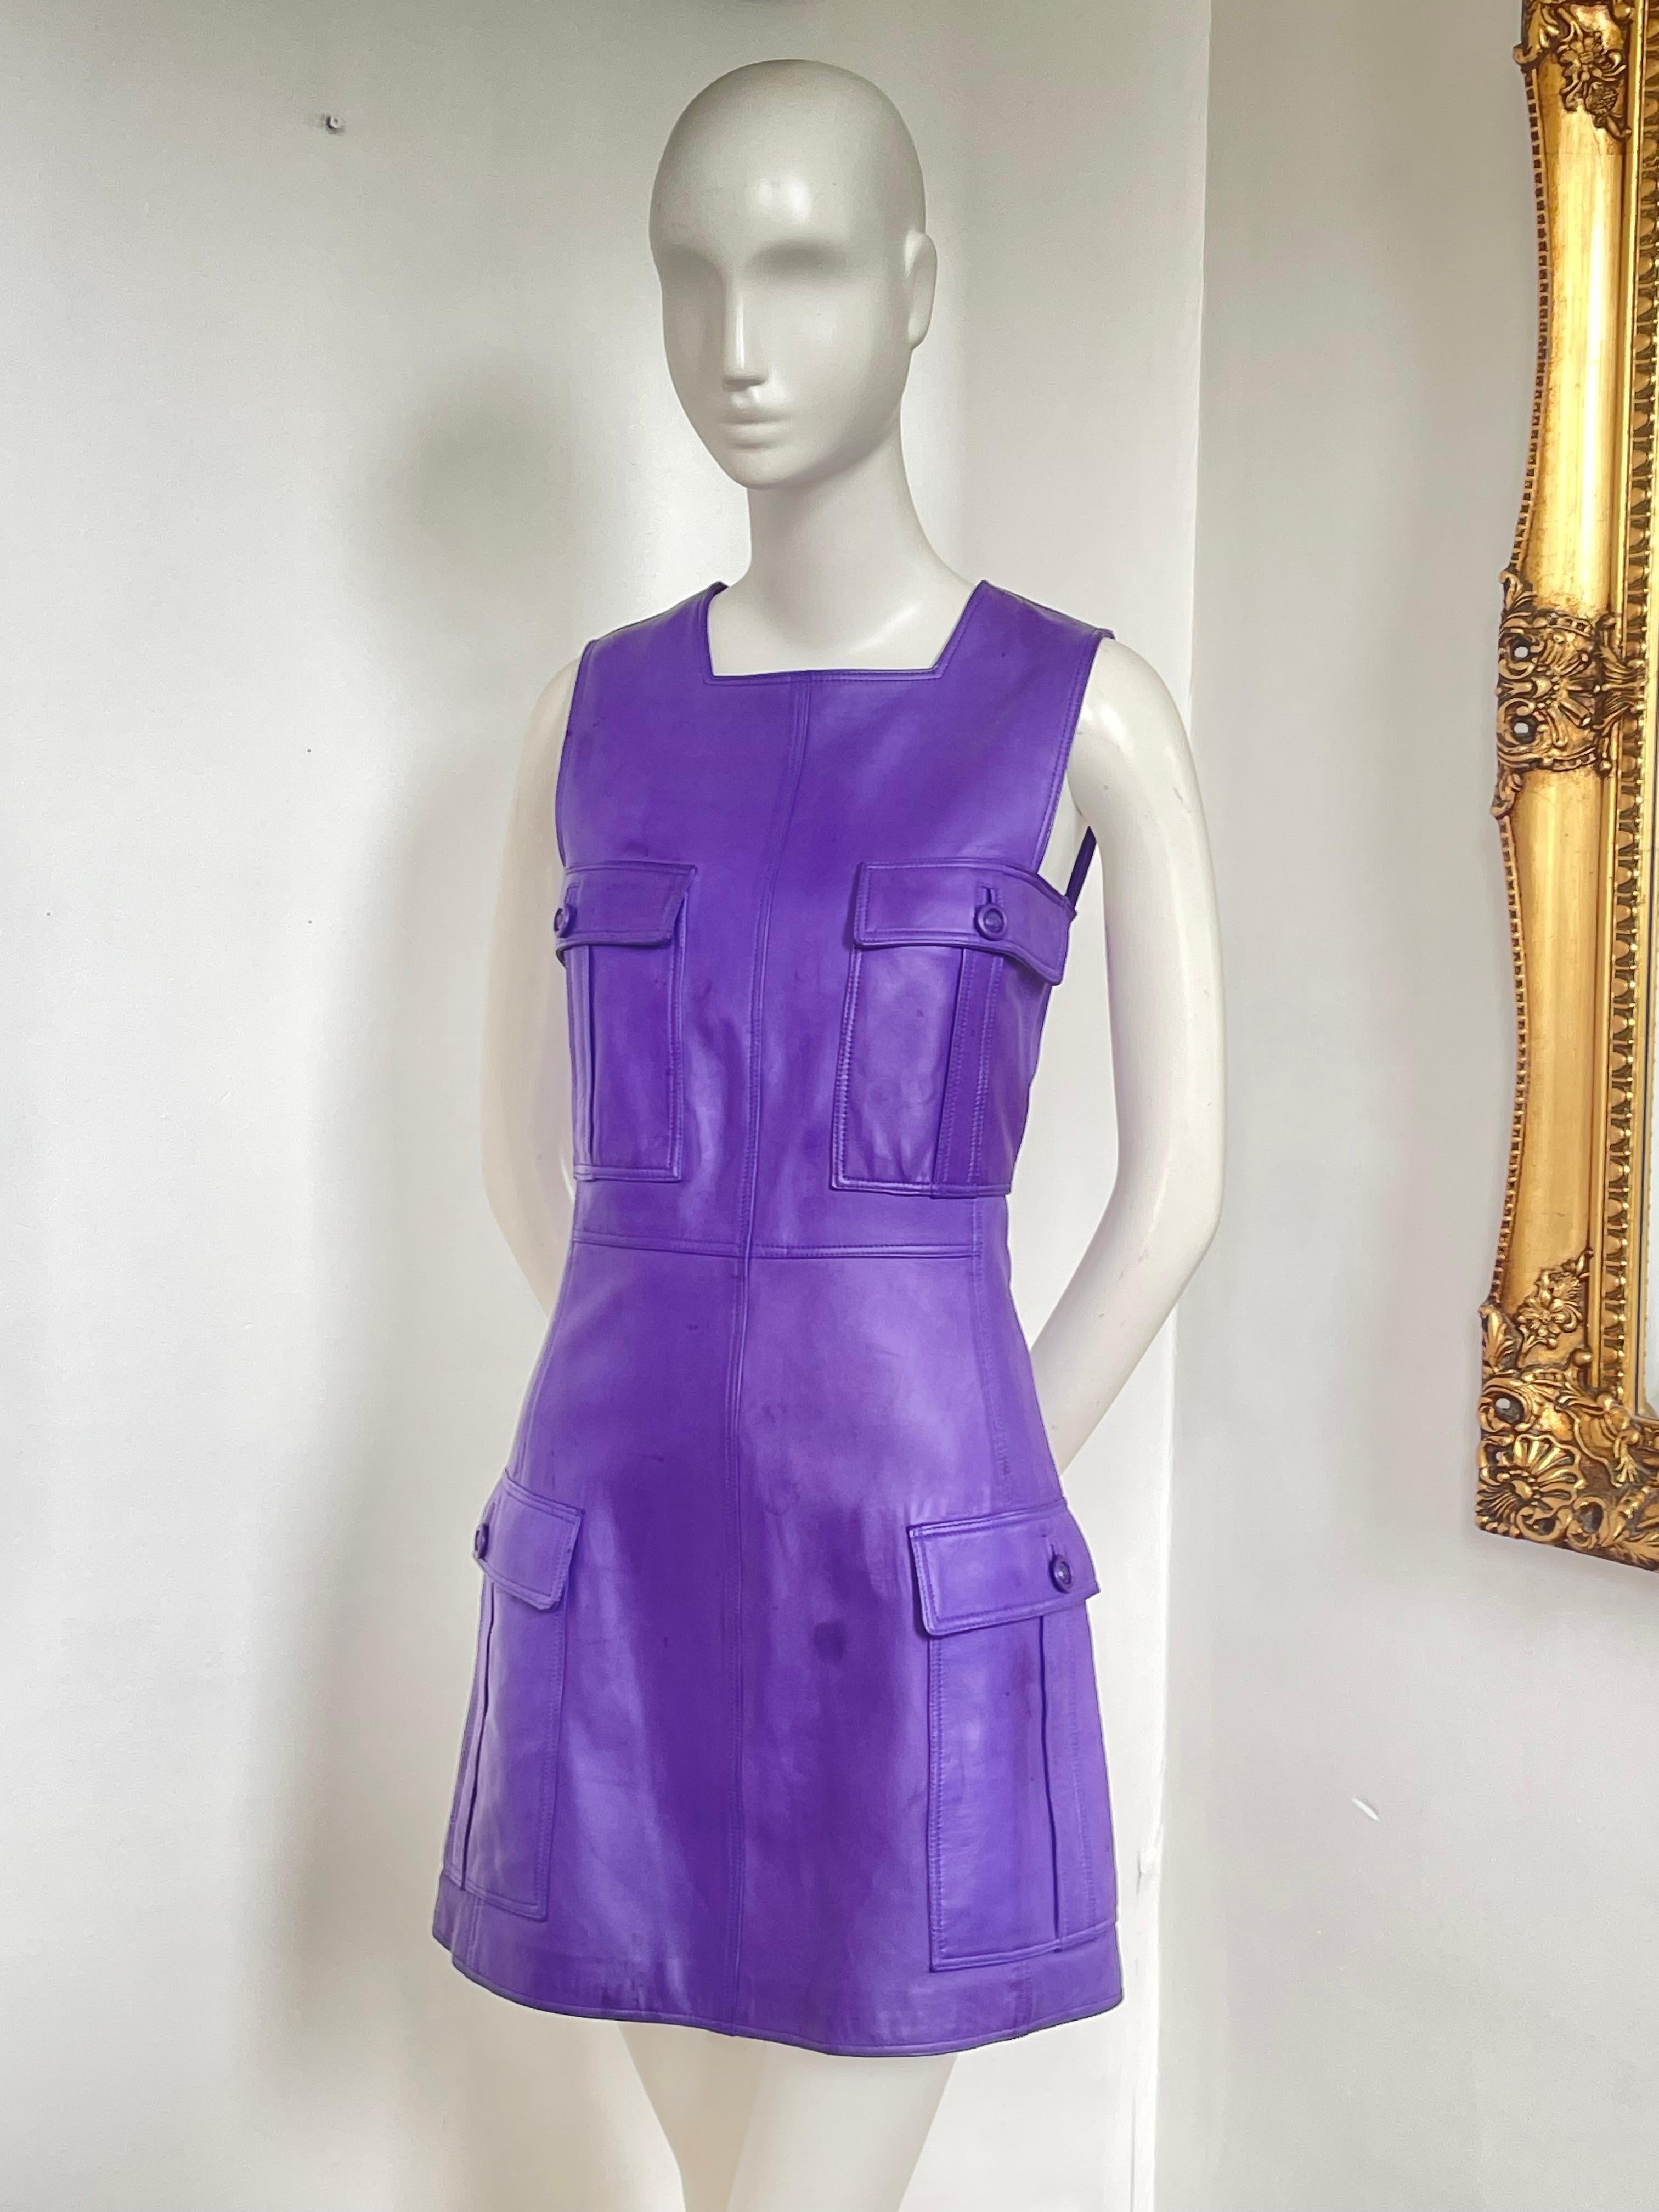 FW 1996 Versace purple leather shift dress with medusa buttons For Sale 2